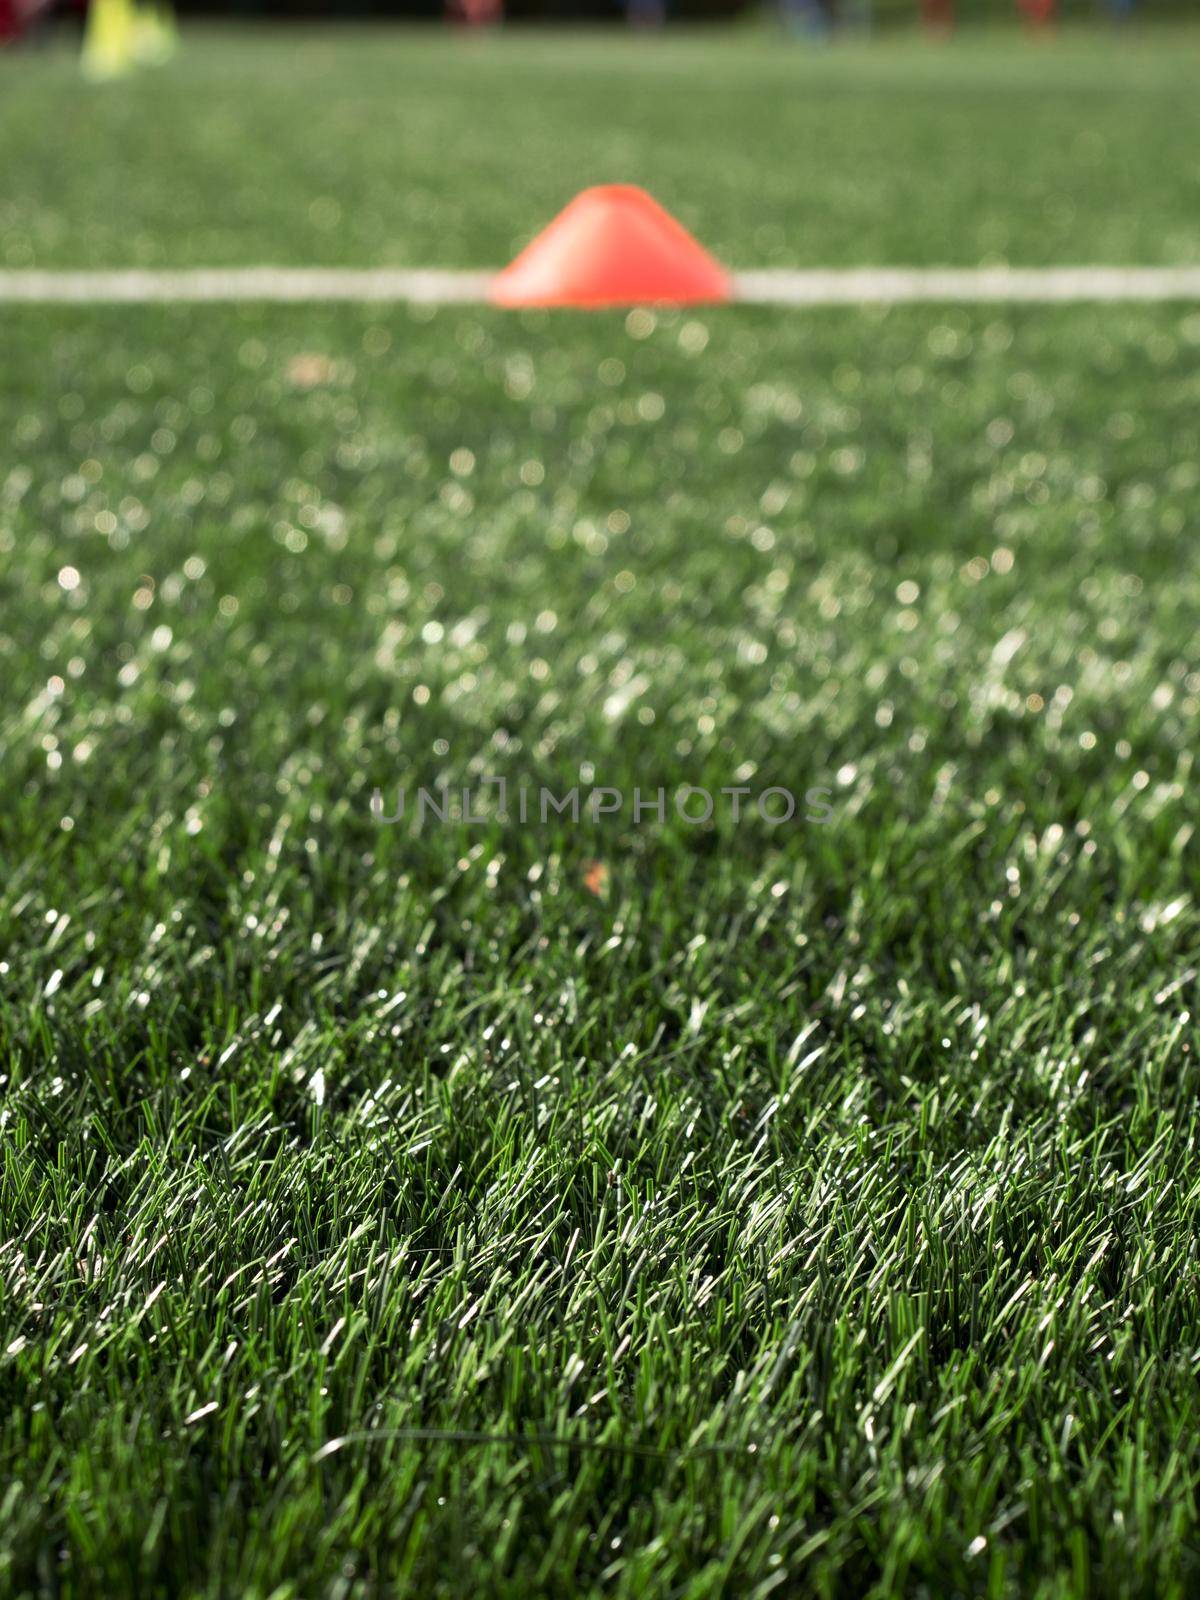 Cones are soccer training equipment on green artificial turf  by rdonar2